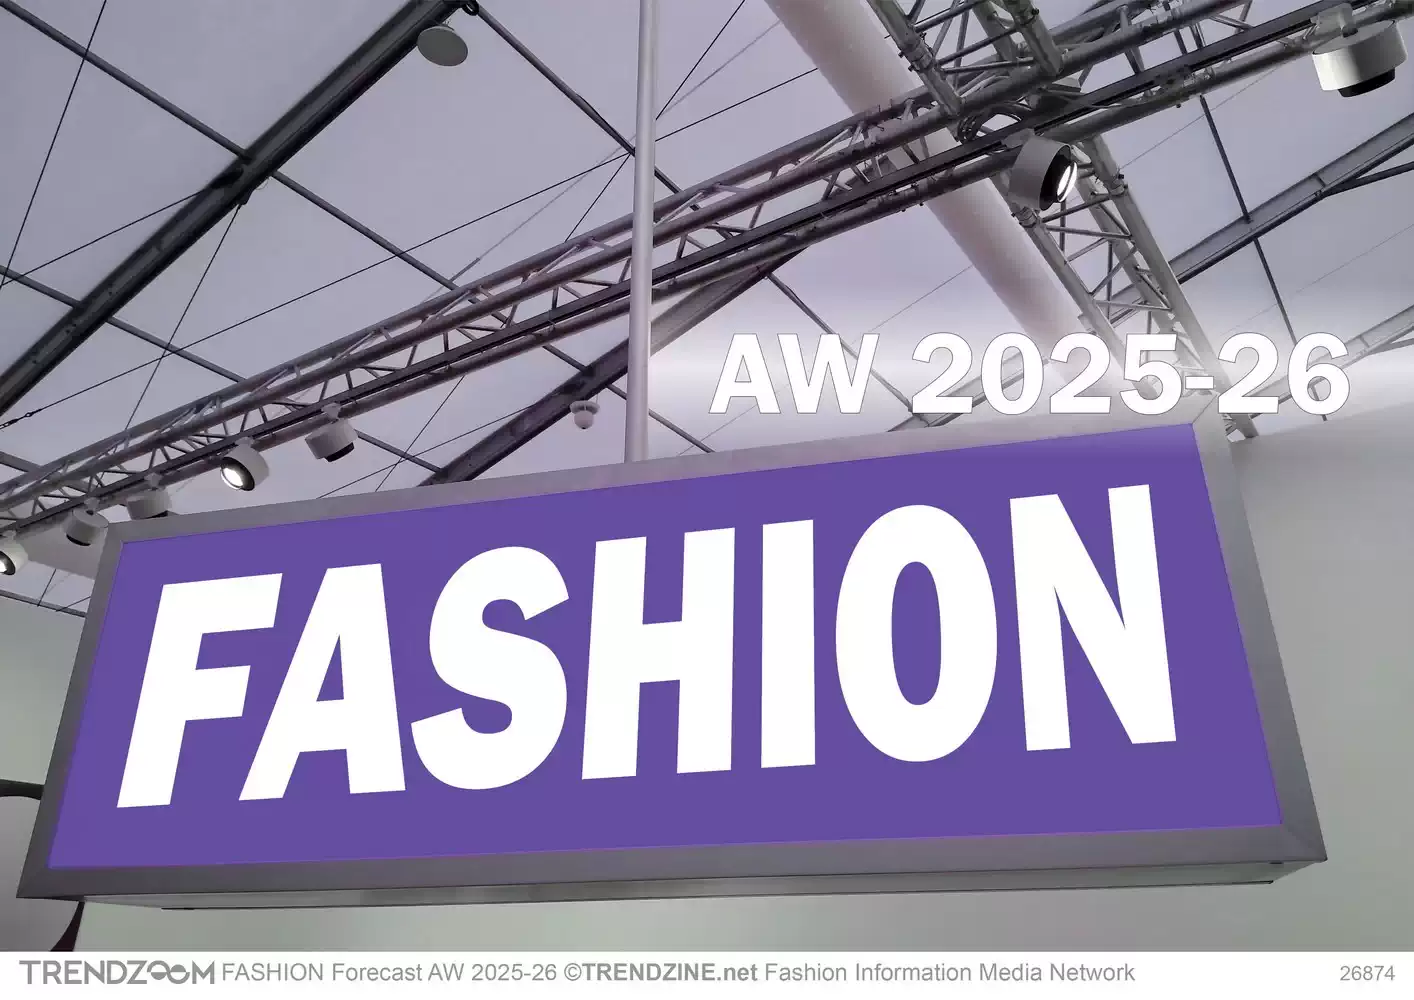 FASHION Forecast AW 2025-26 Women Men Youth Apparel Accessories